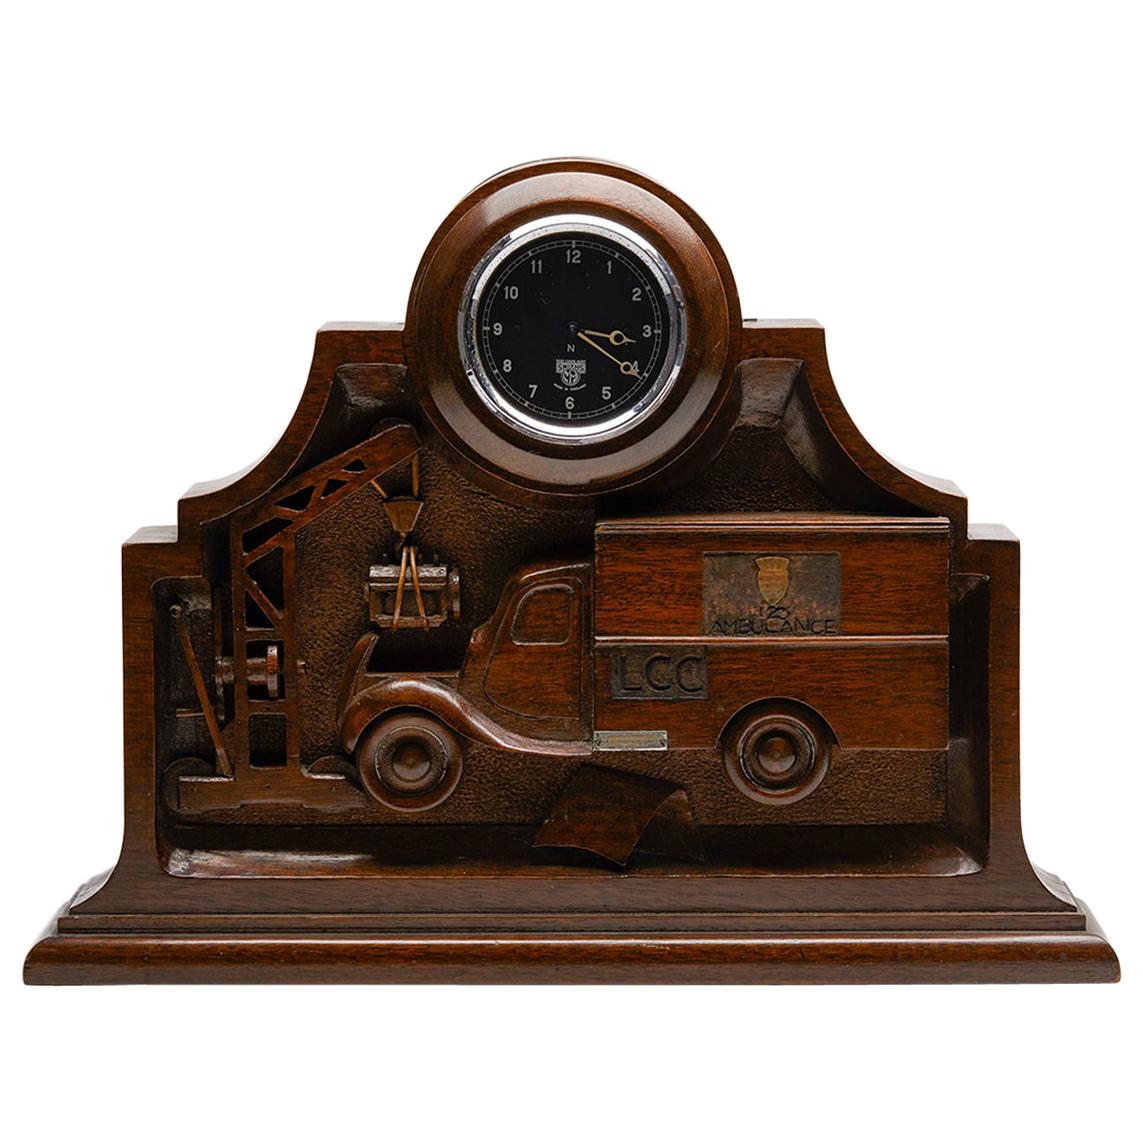 Unique English WWII Carved Wood Ambulance Clock with Smiths Movement, circa 1943